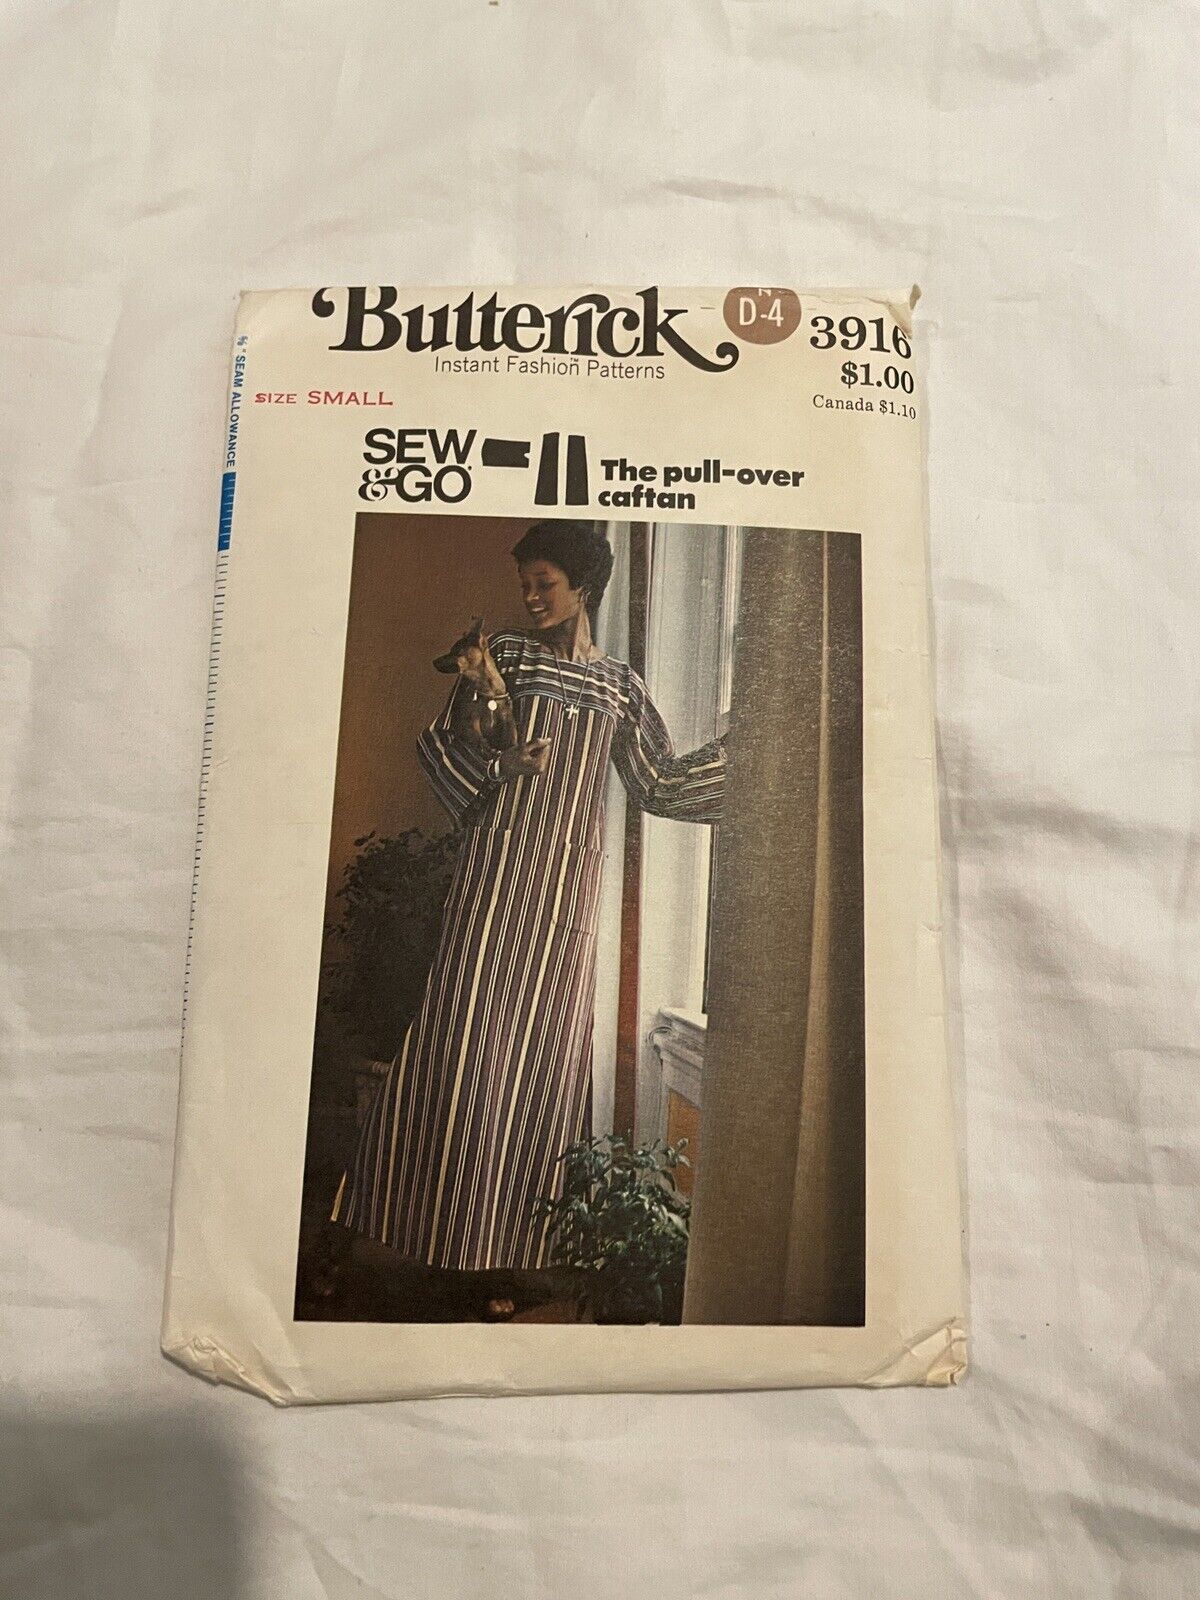 Vtg Butterick Sewing Pattern Womens Caftan Size Small #3916 Sew & Go CUT